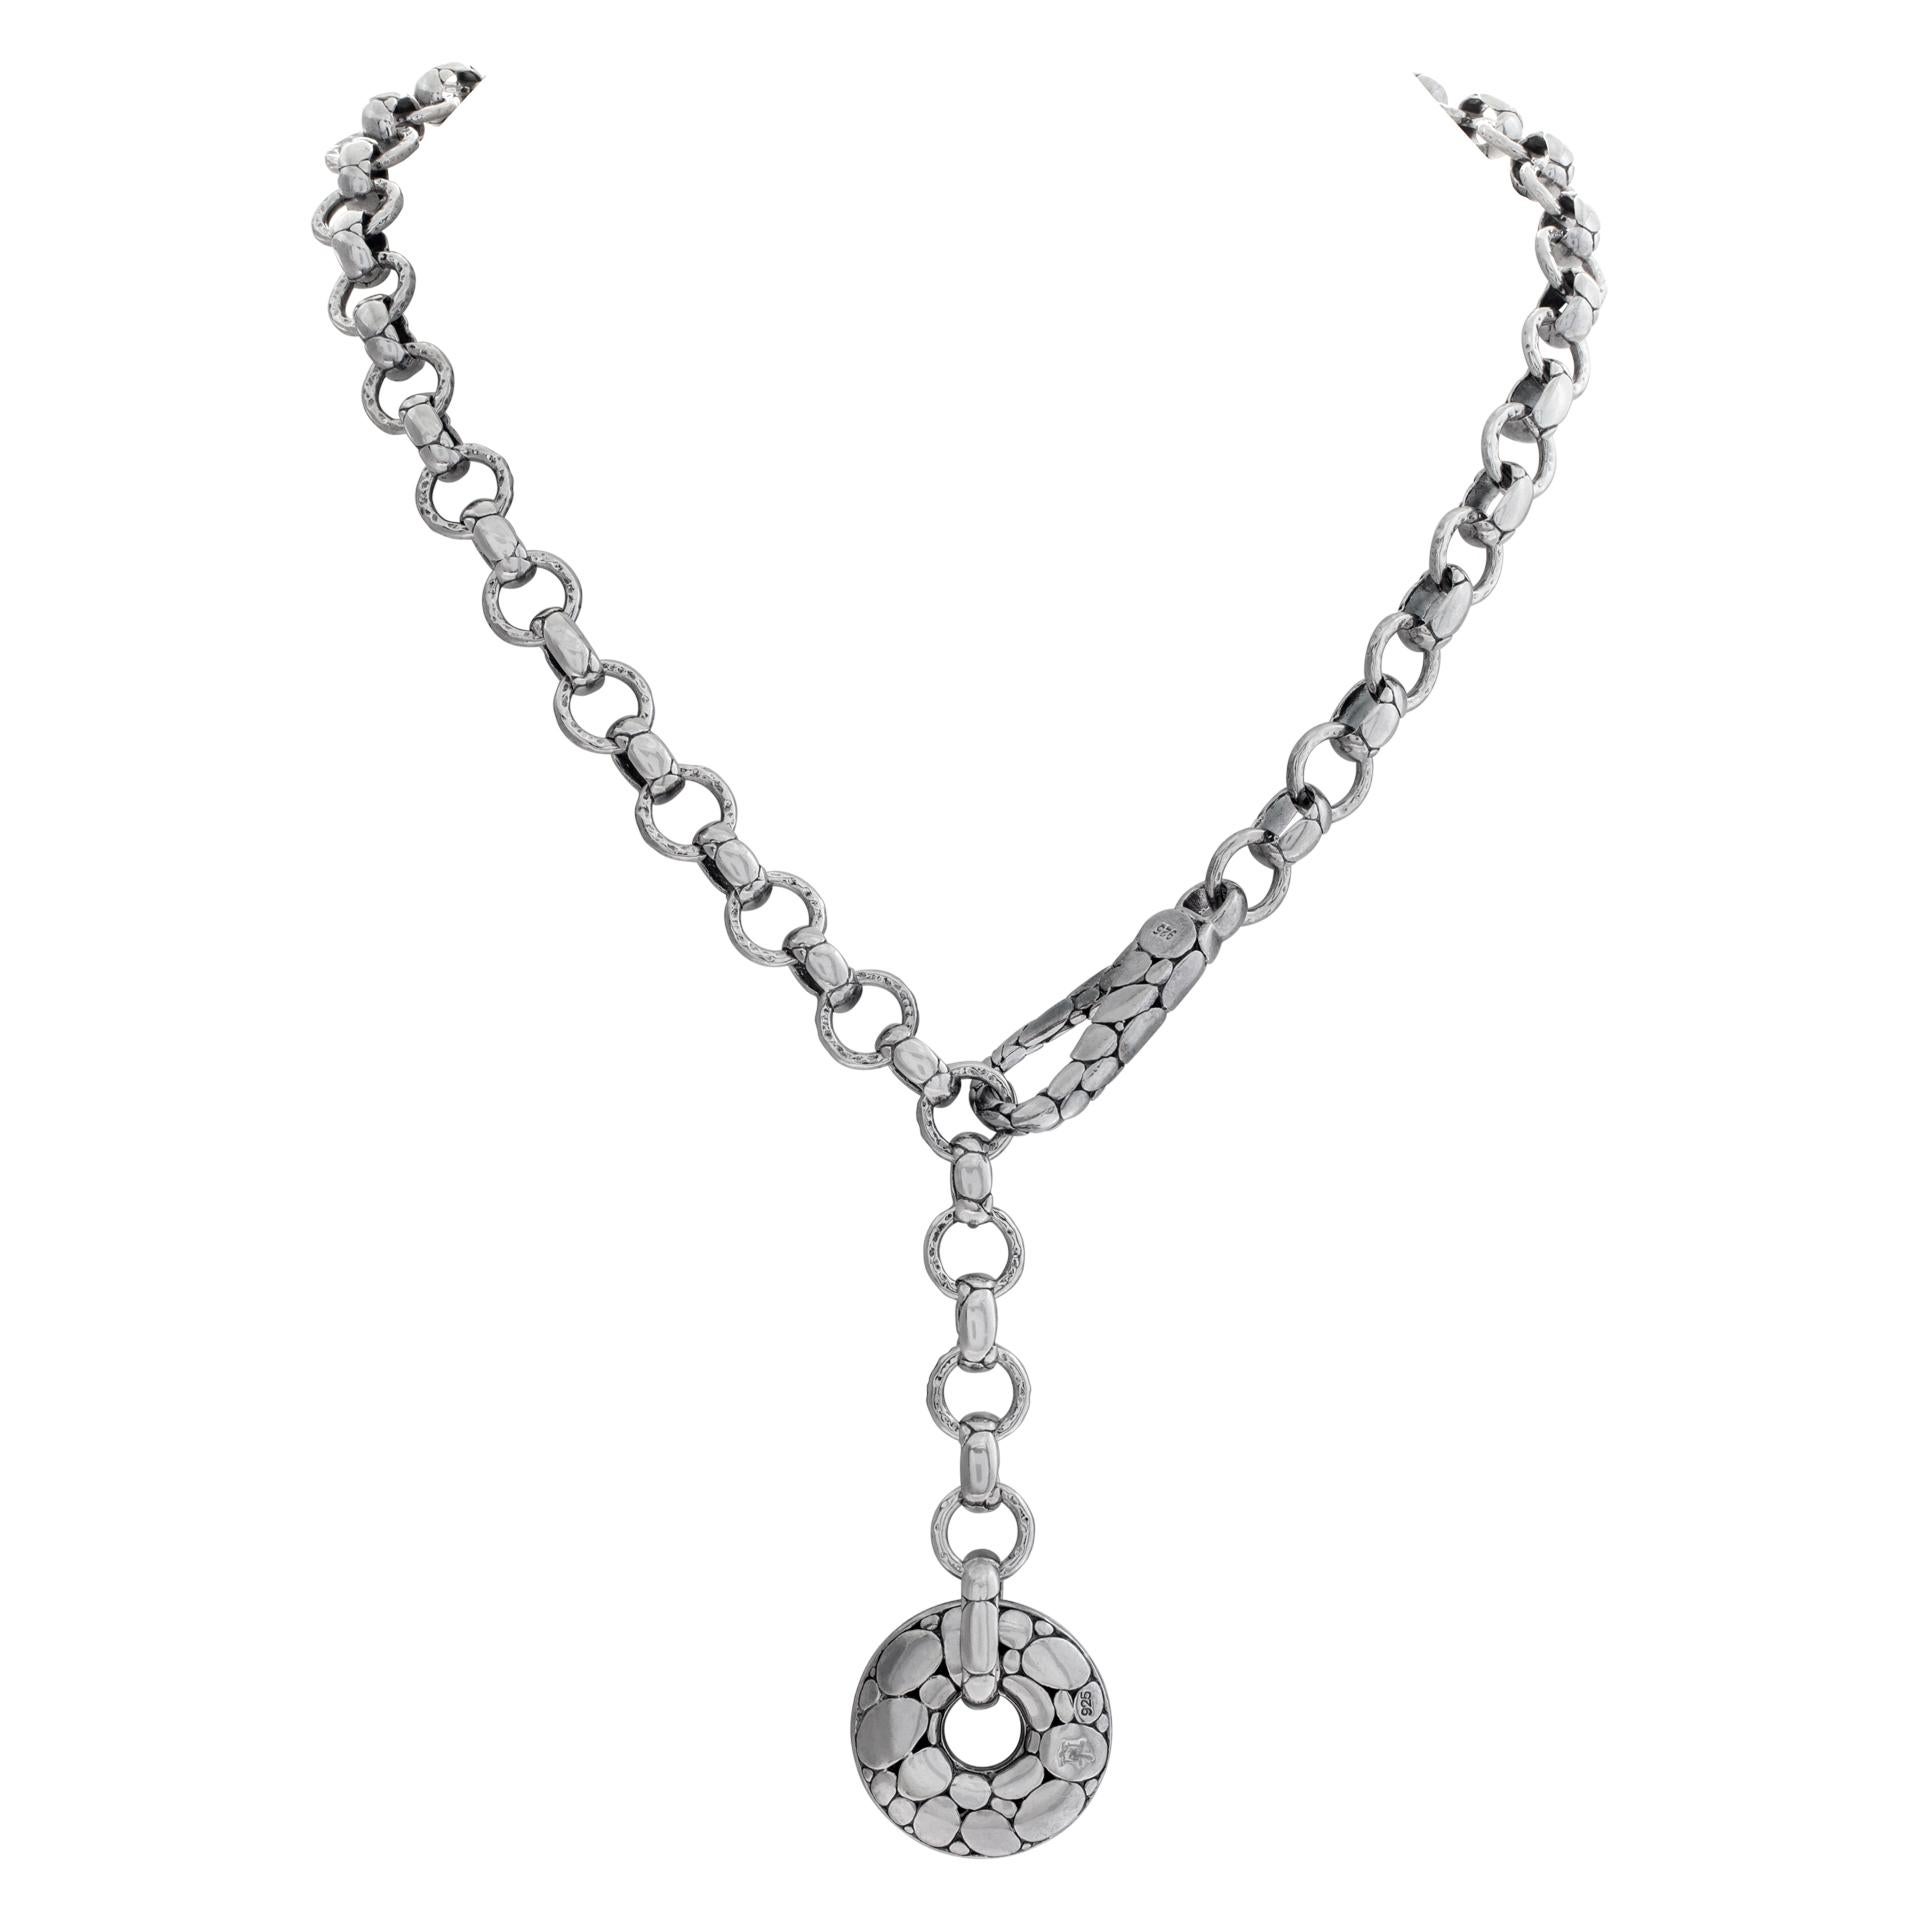 John Hardy Kali necklace in sterling silver. Length 18 inches. Comes with JH pouch.